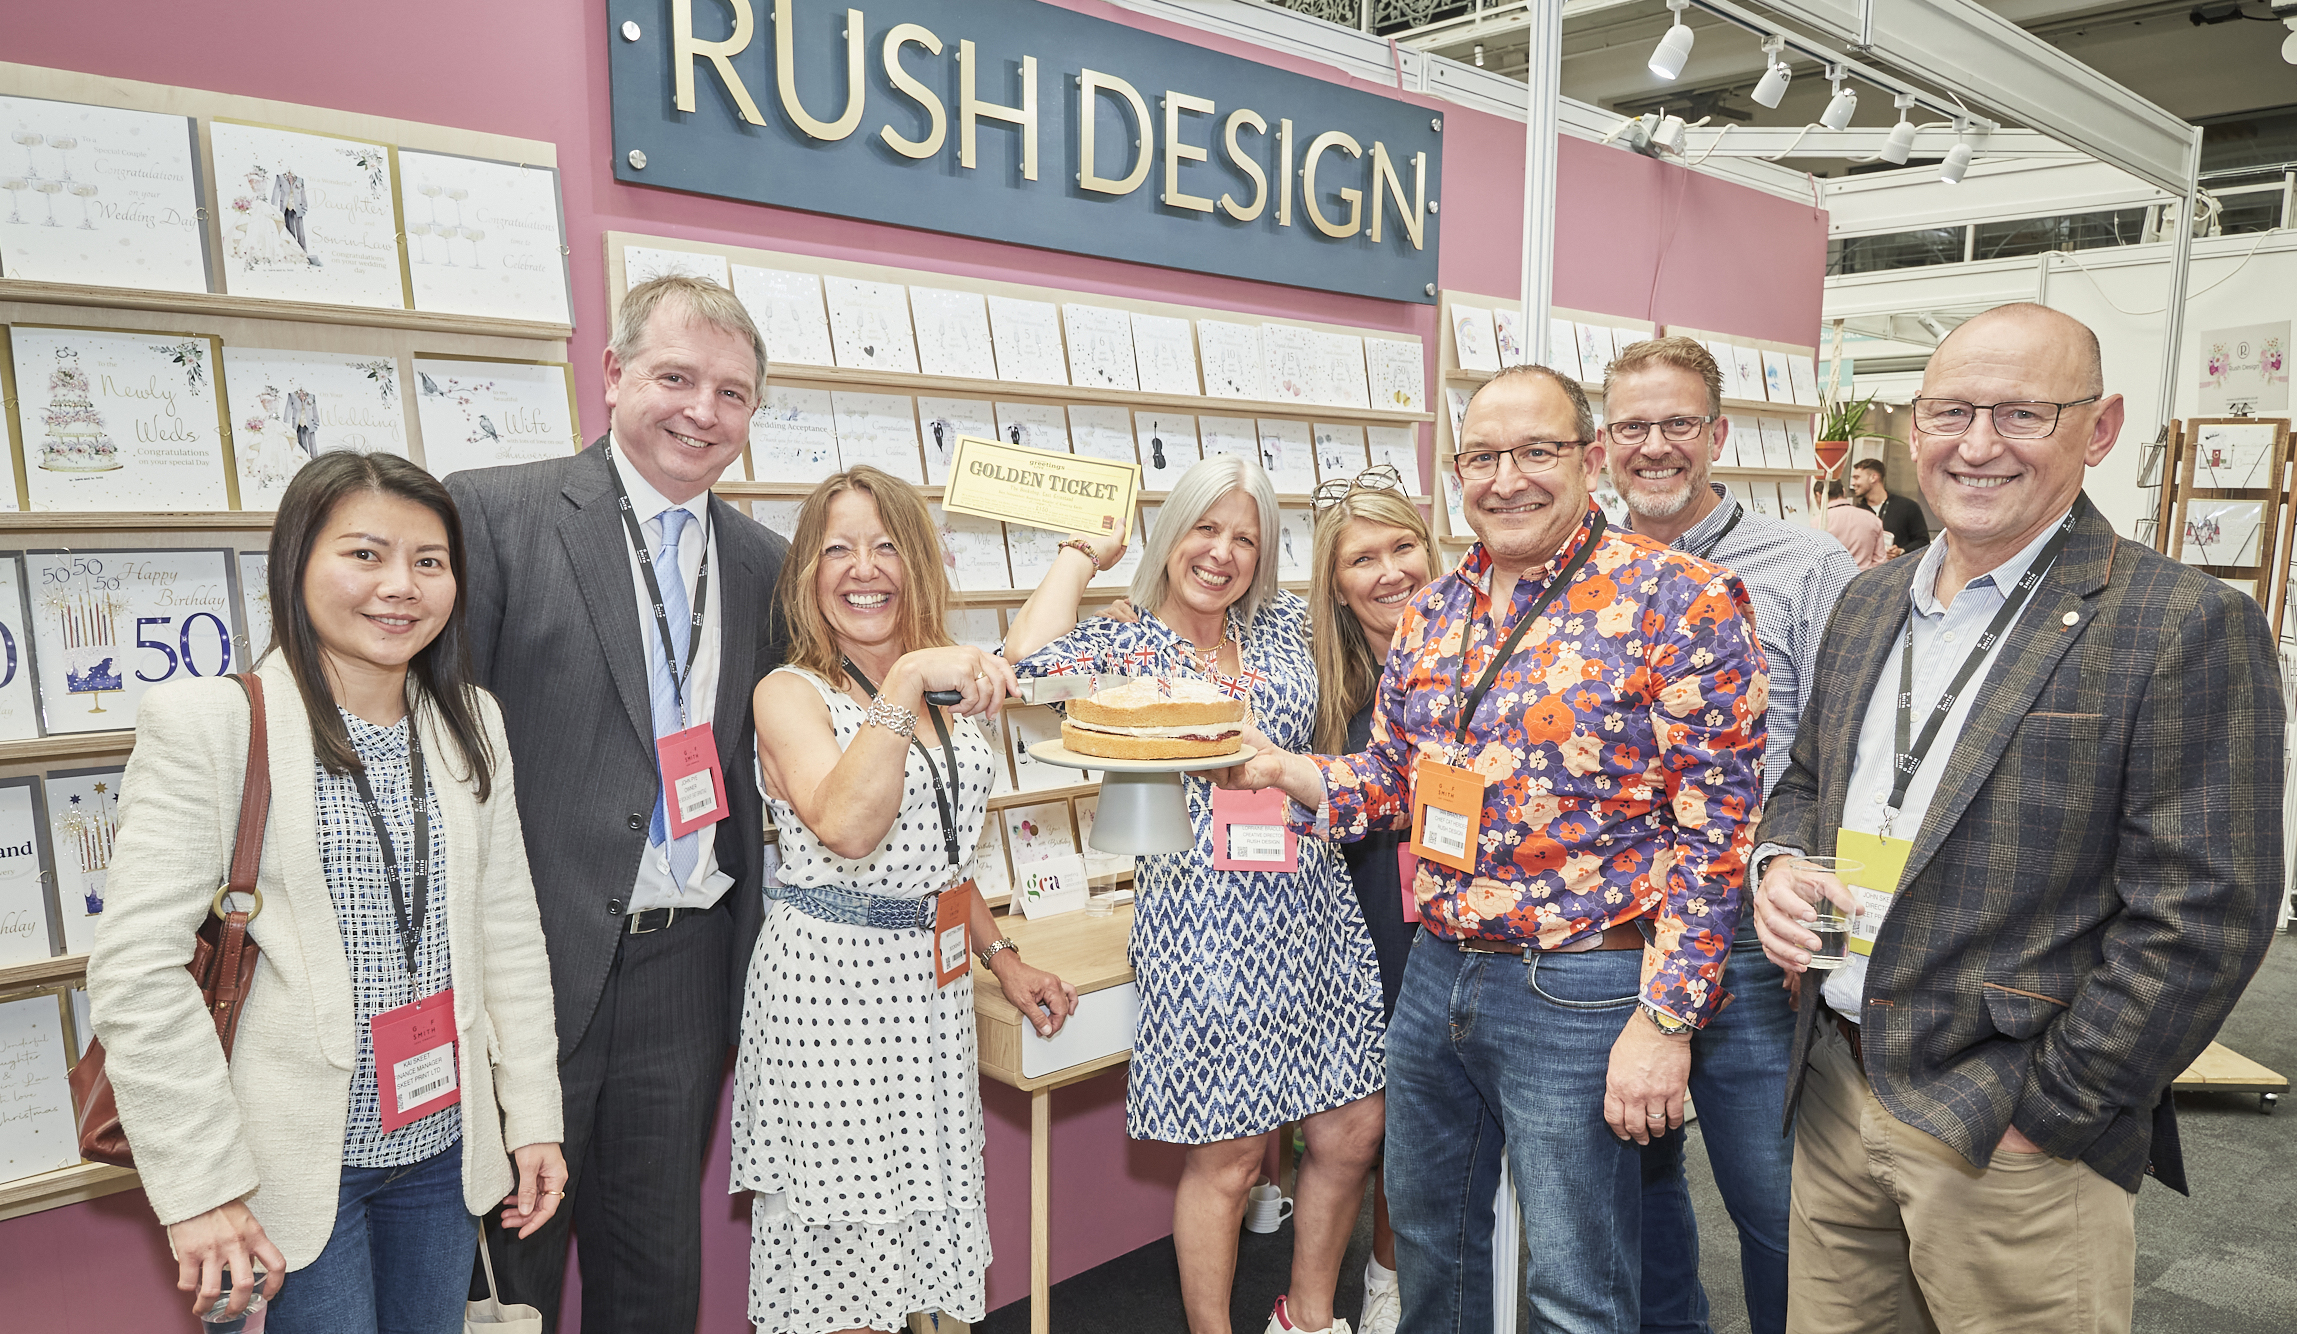 Above: Having their cake and eating it – Rush Design’s Lorraine (centre) and Ian Bradley (3rd right) shared a slice with chums from Hugs & Kisses, Skeet Print and The East Grinstead Bookshop at PG Live